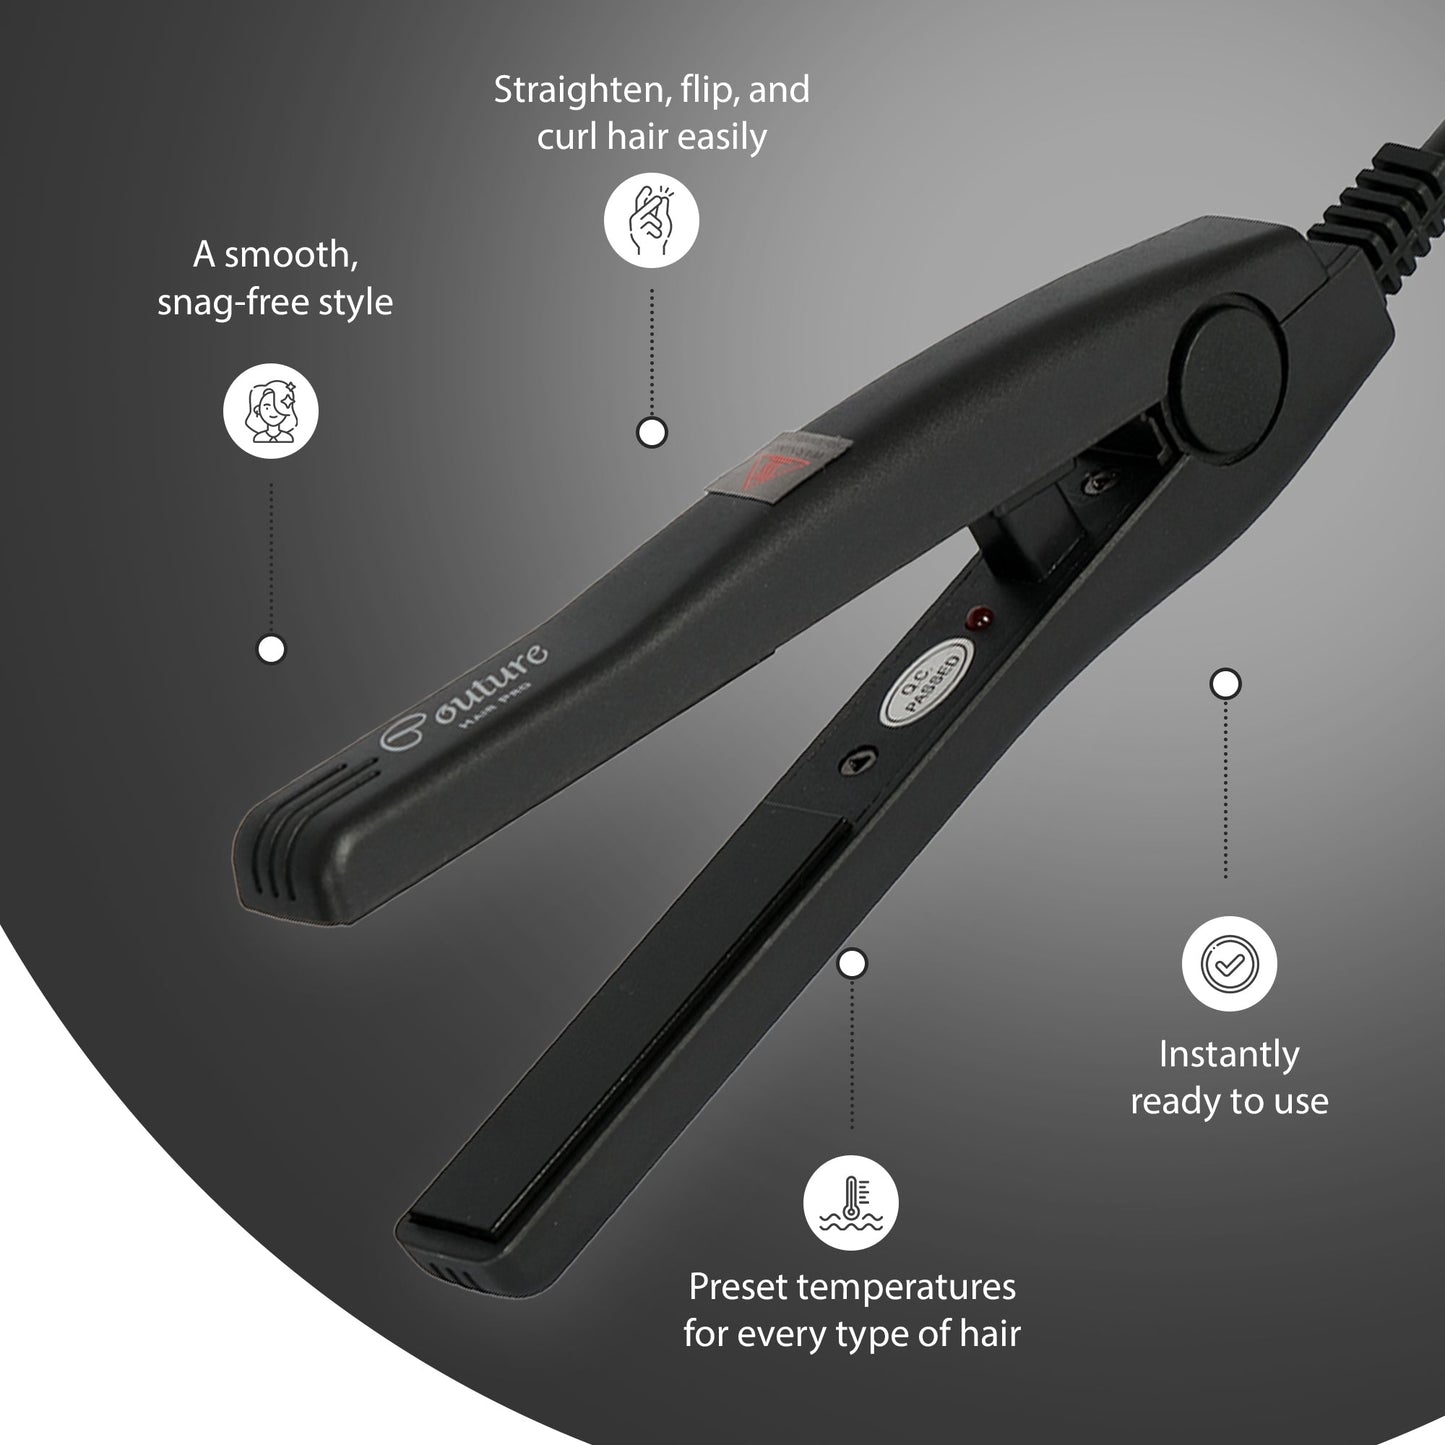 Couture Hair Pro Petite Mini Hair Straightener - #1 Selling Hair Tools Brand in the Middle East - Couture Hair Pro